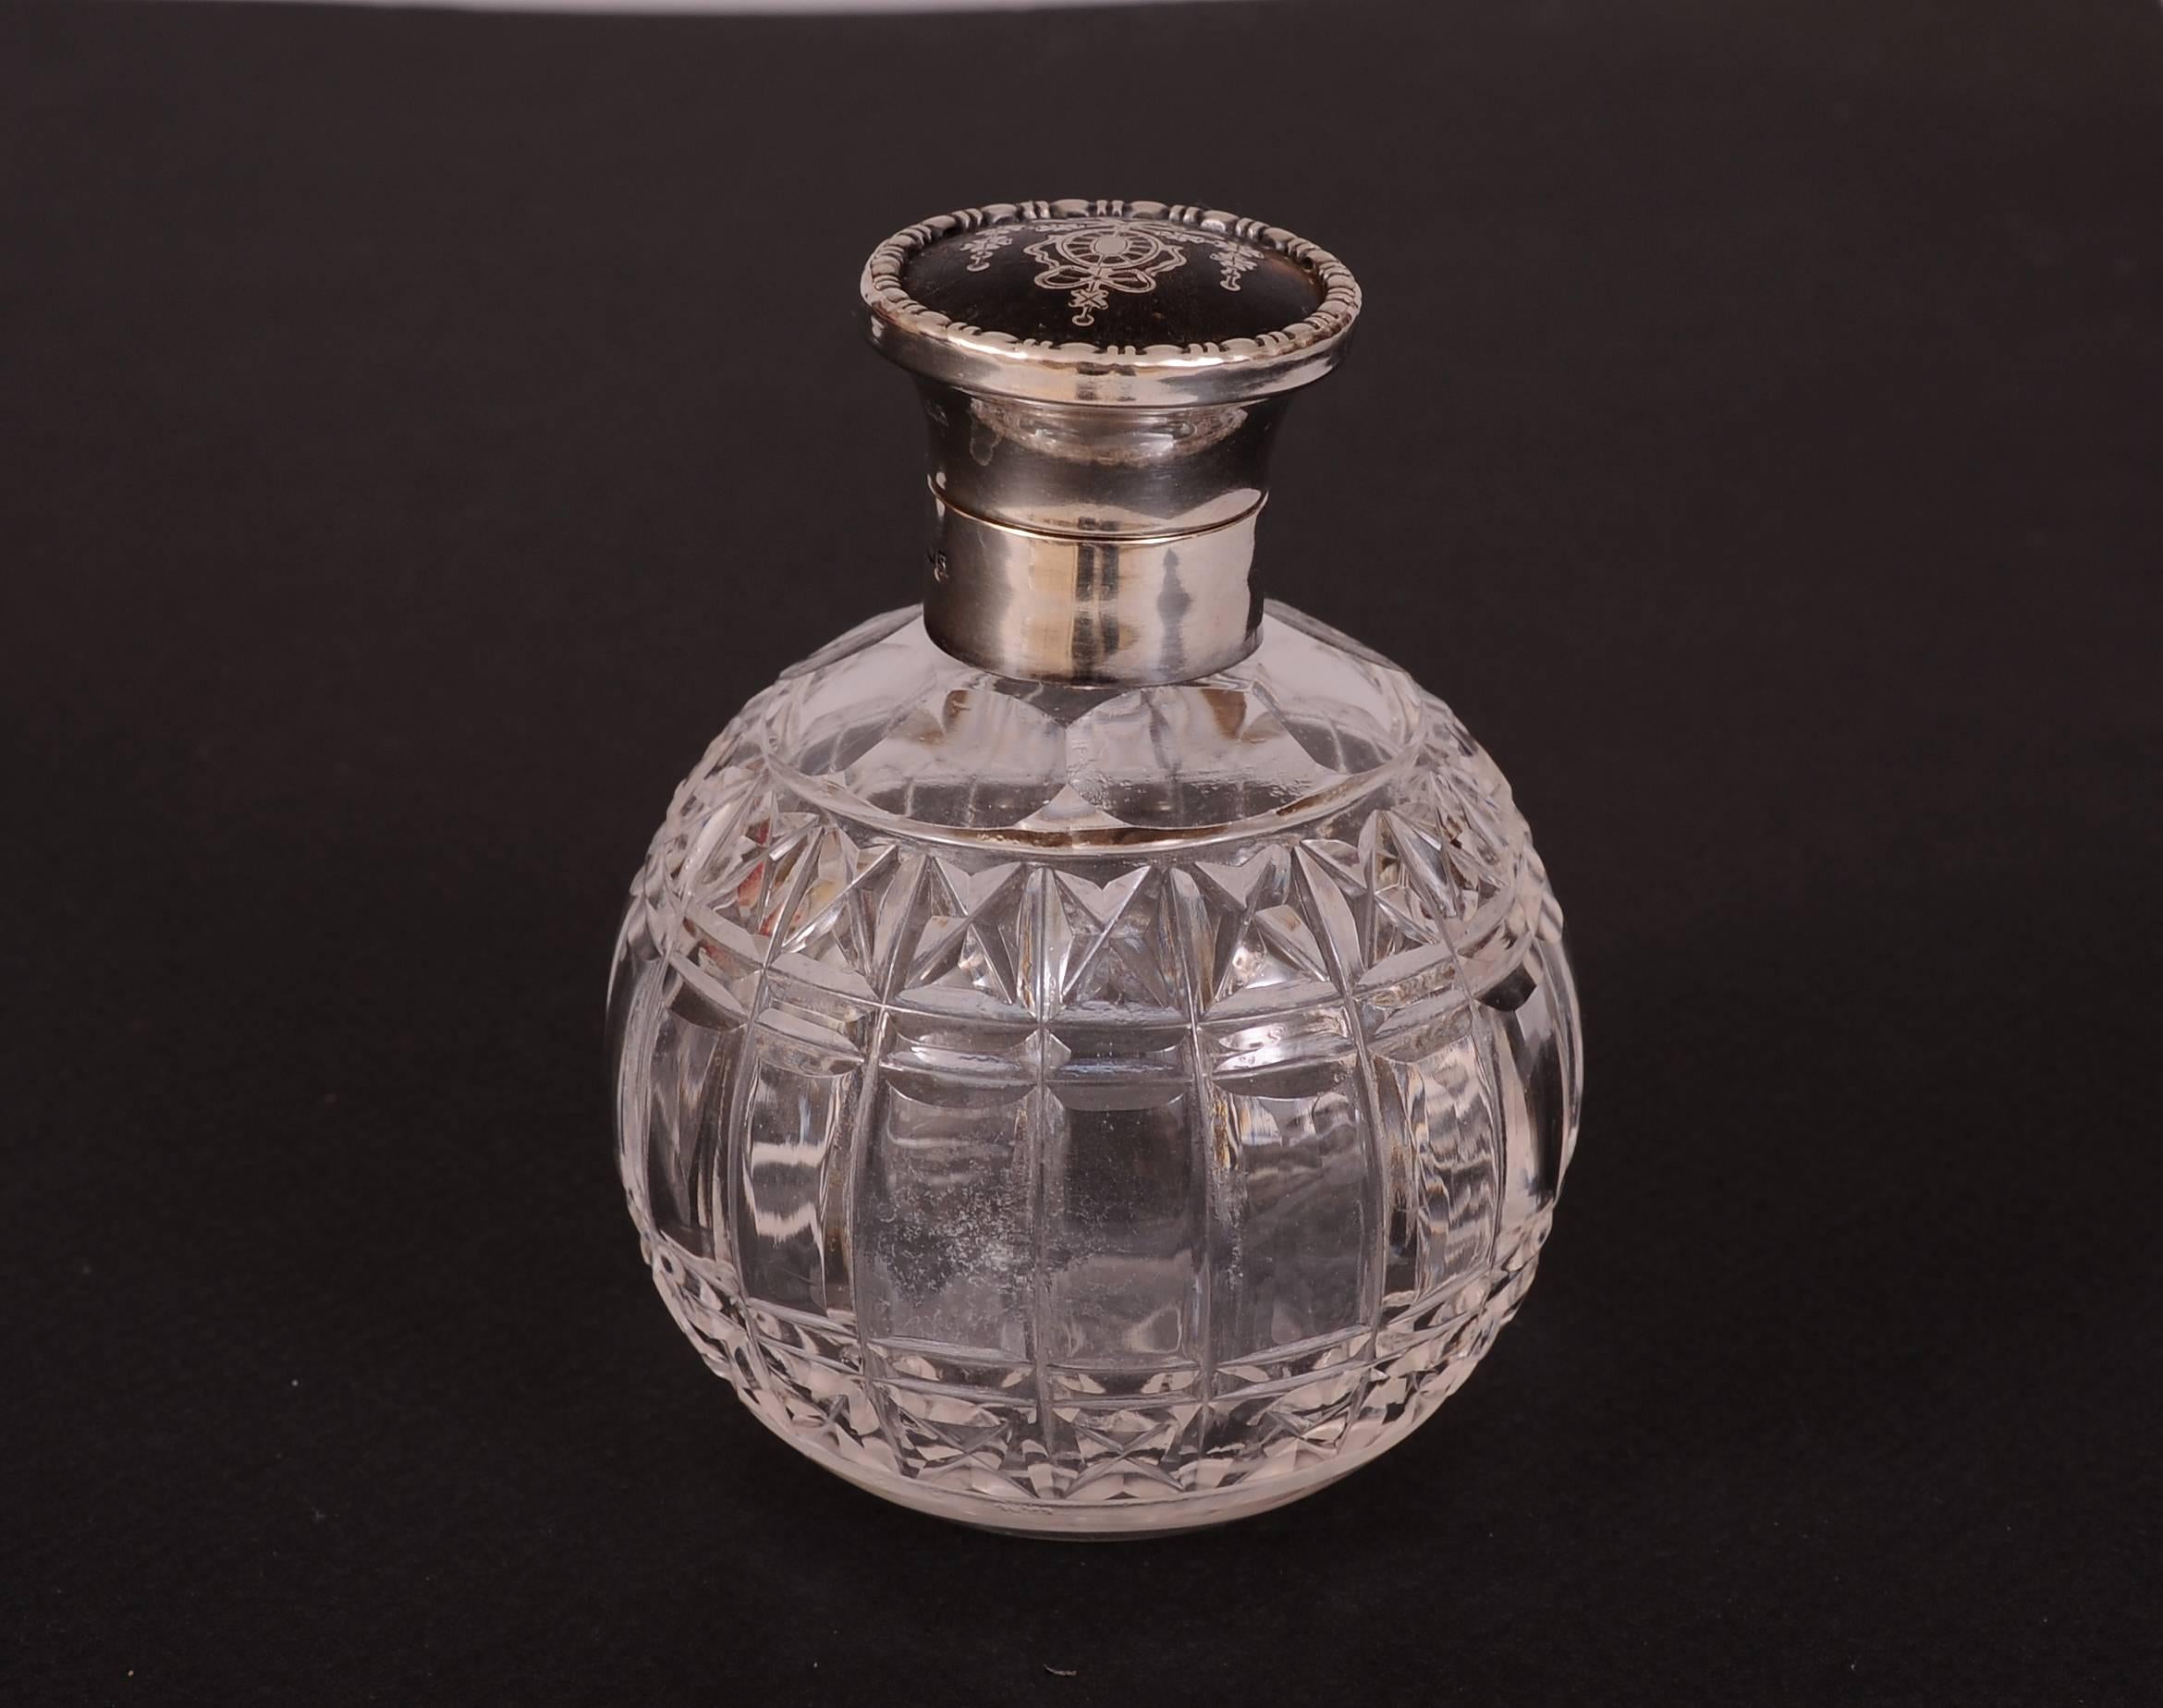 A hinged sterling silver top has a piece of tortoise shell inlaid with a sterling silver design of ribbons and flowers above a round cut glass bottle. The top is marked L&S followed by hallmarks. It is in excellent